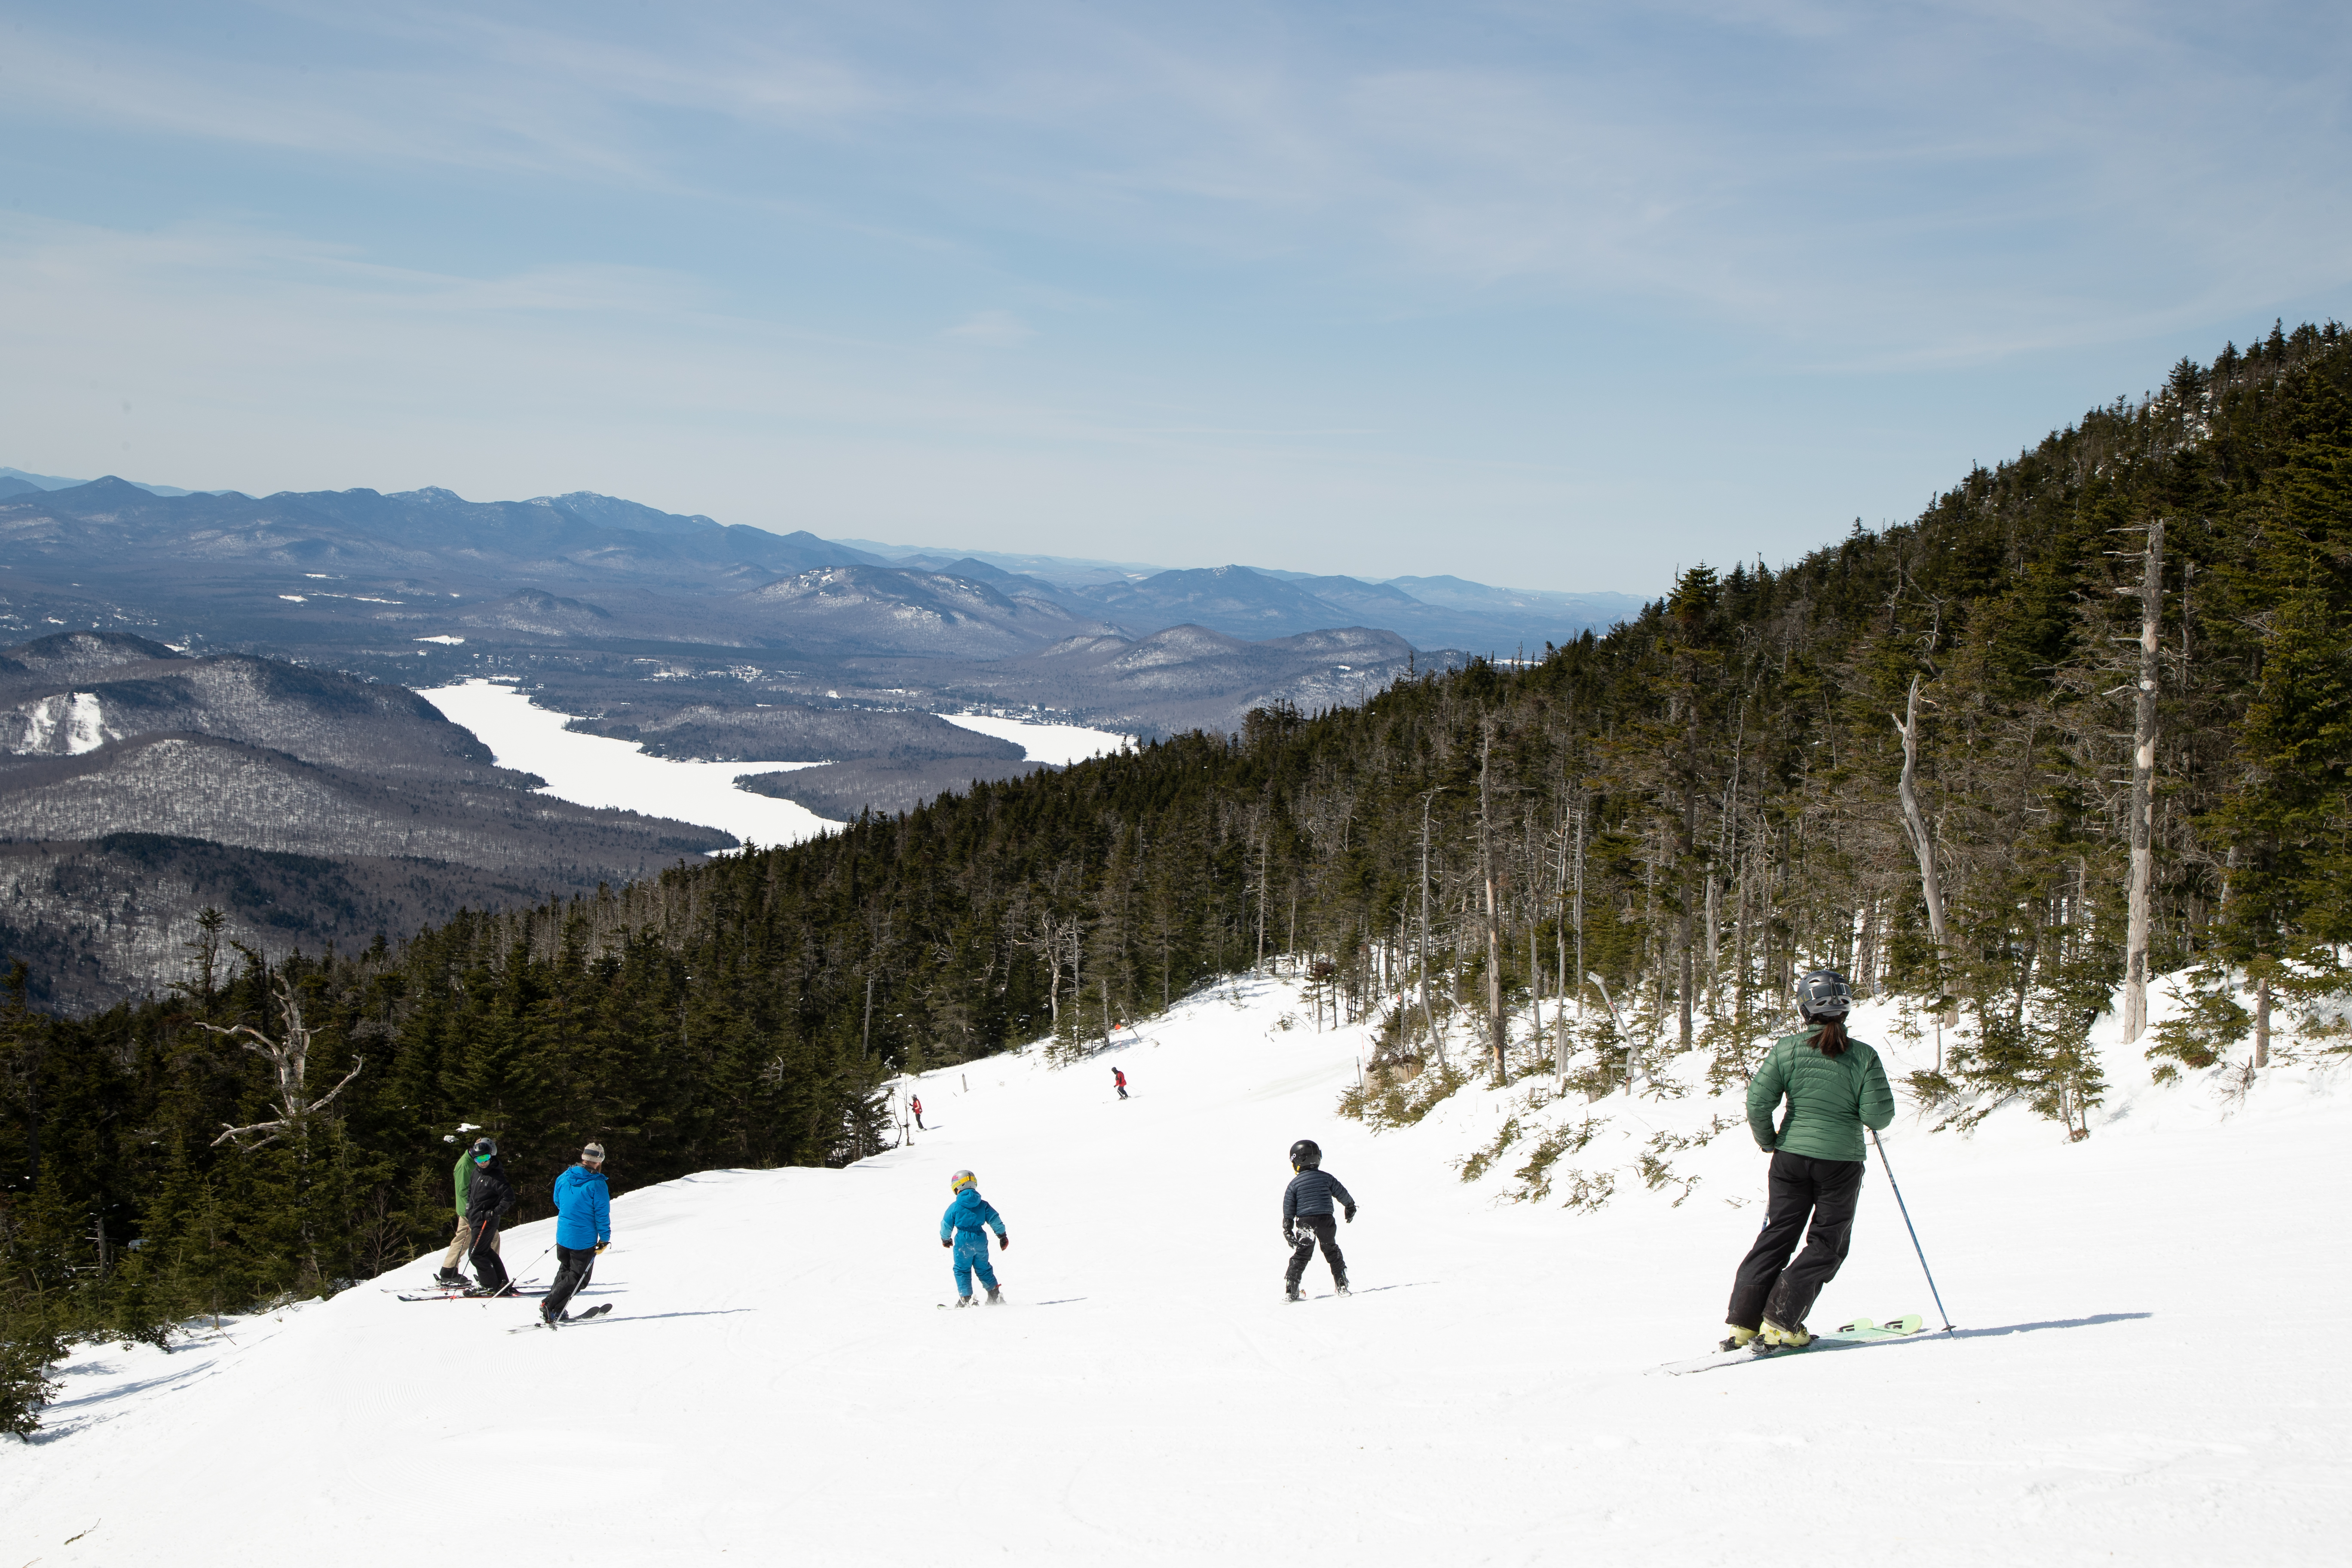 A family with small children ski at Whiteface.